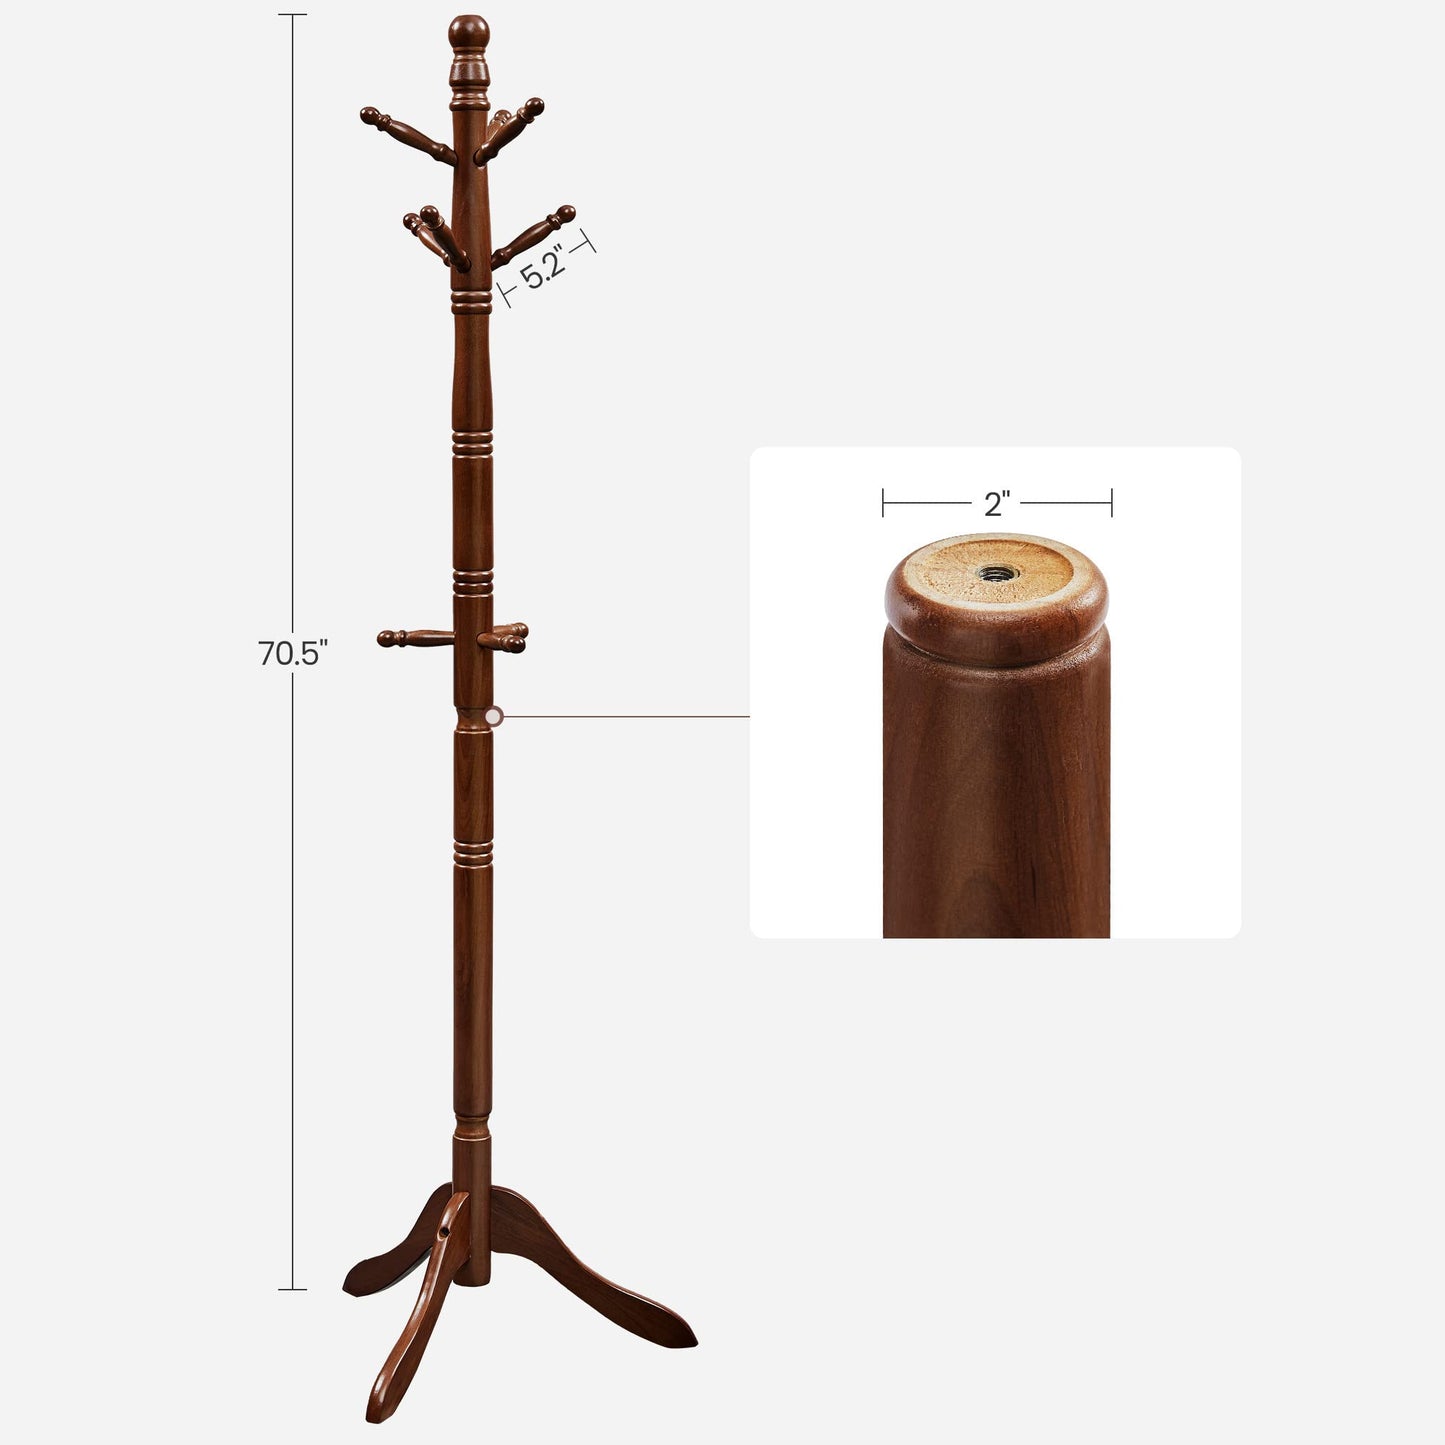 VASAGLE Solid Wood Coat Rack and Stand, Free Standing Hall Coat Tree with 10 Hooks for Hats, Bags, Purses, for Entryway, Hallway, Rubberwood, Dark Walnut URCR03WN